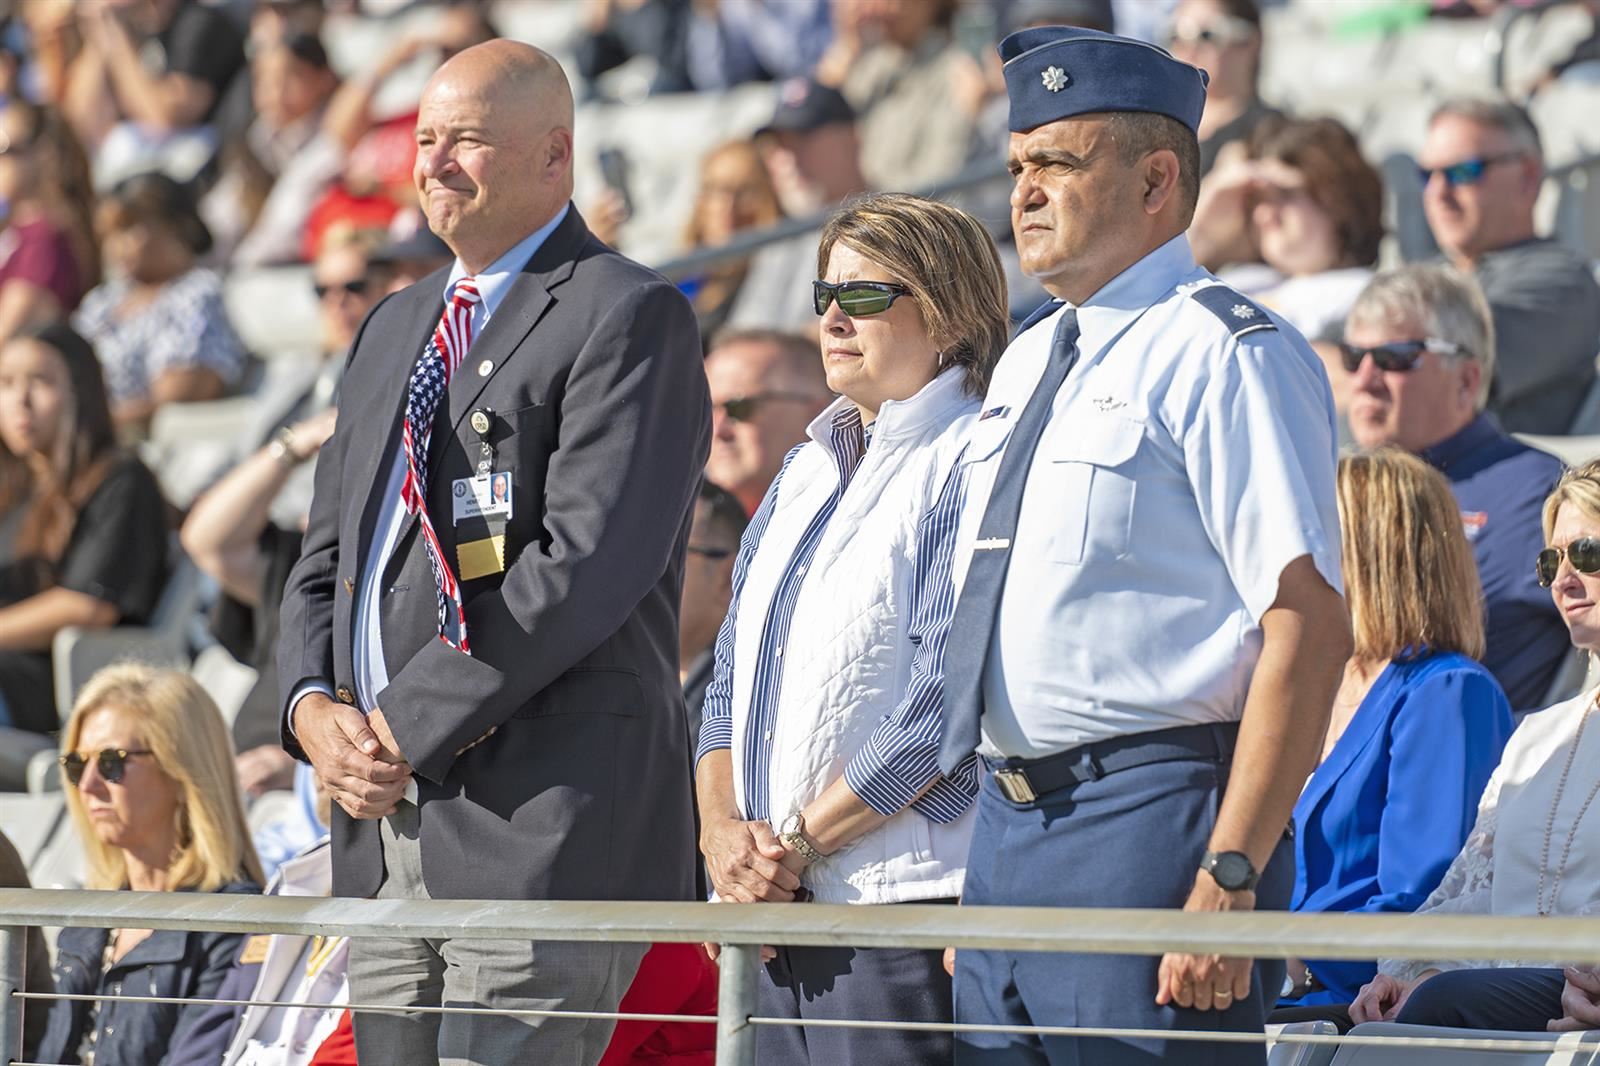 Among the guests were family members of the cadets, Board of Trustees members and campus and district administrators.